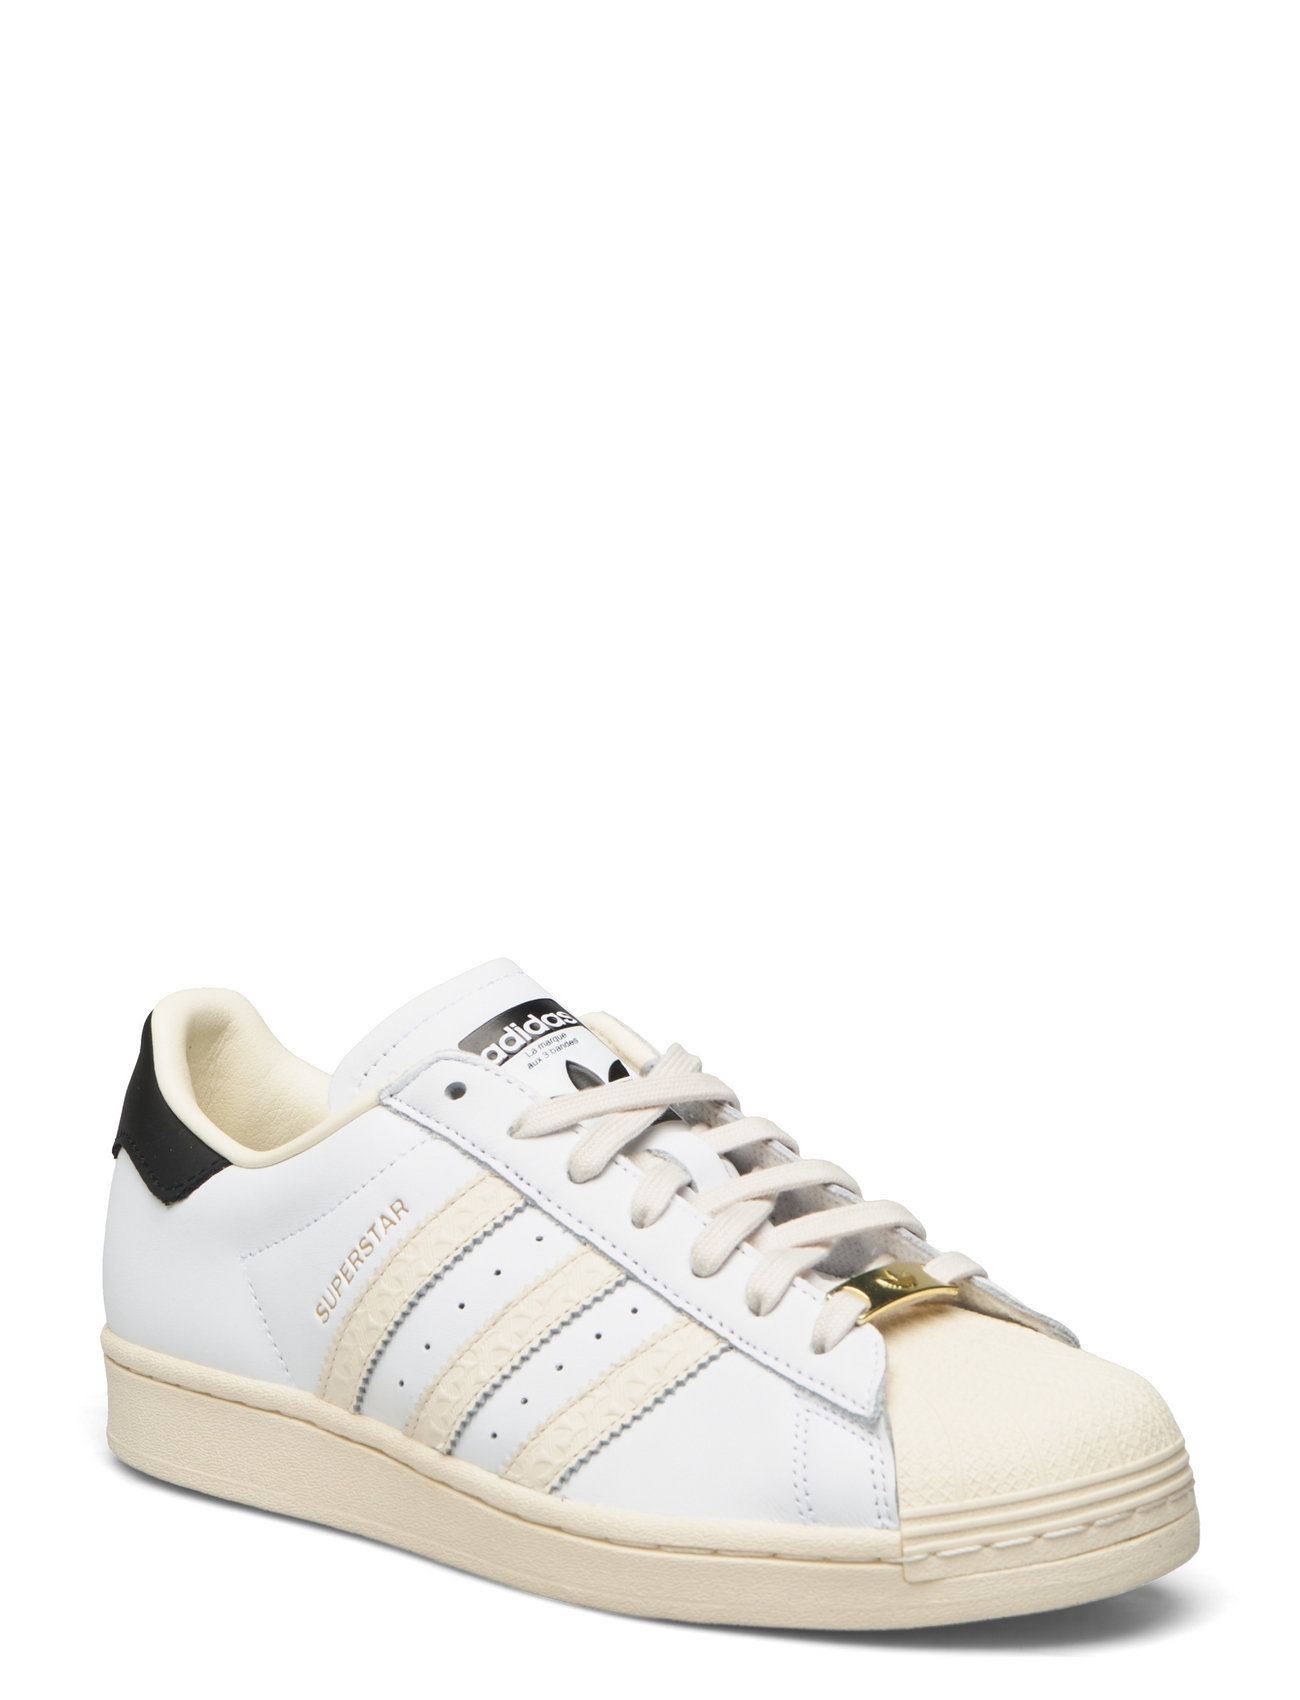 adidas Superstar Lave sneakers Boozt.com